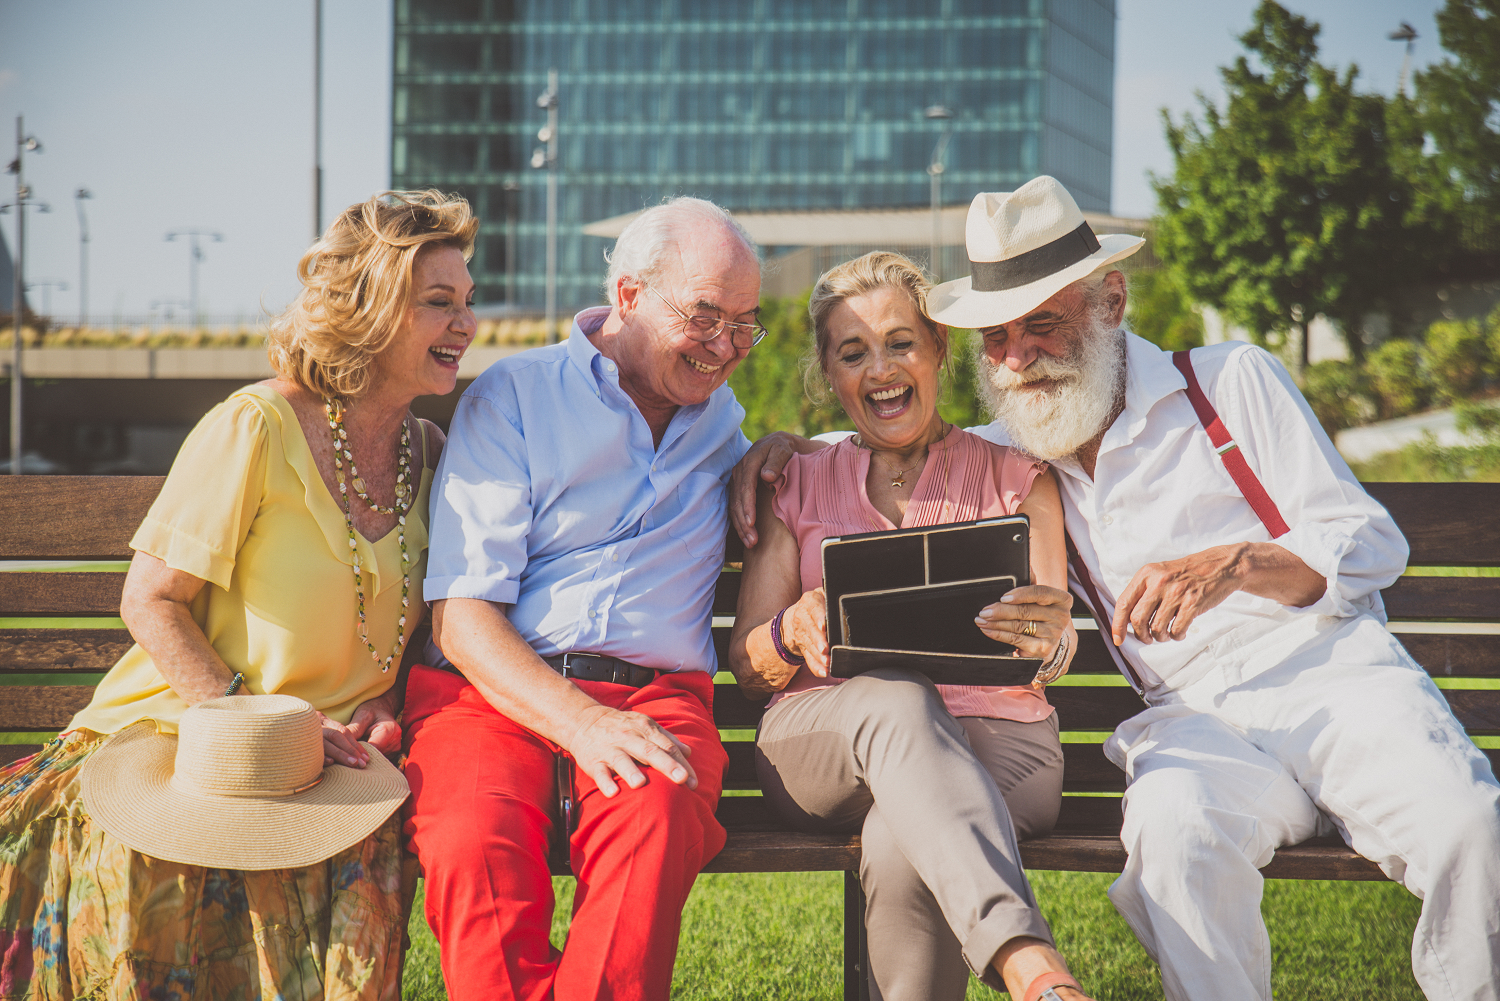 Group of senior people sat on a bench outdoors looking at a tablet, representing the charity supporter journey